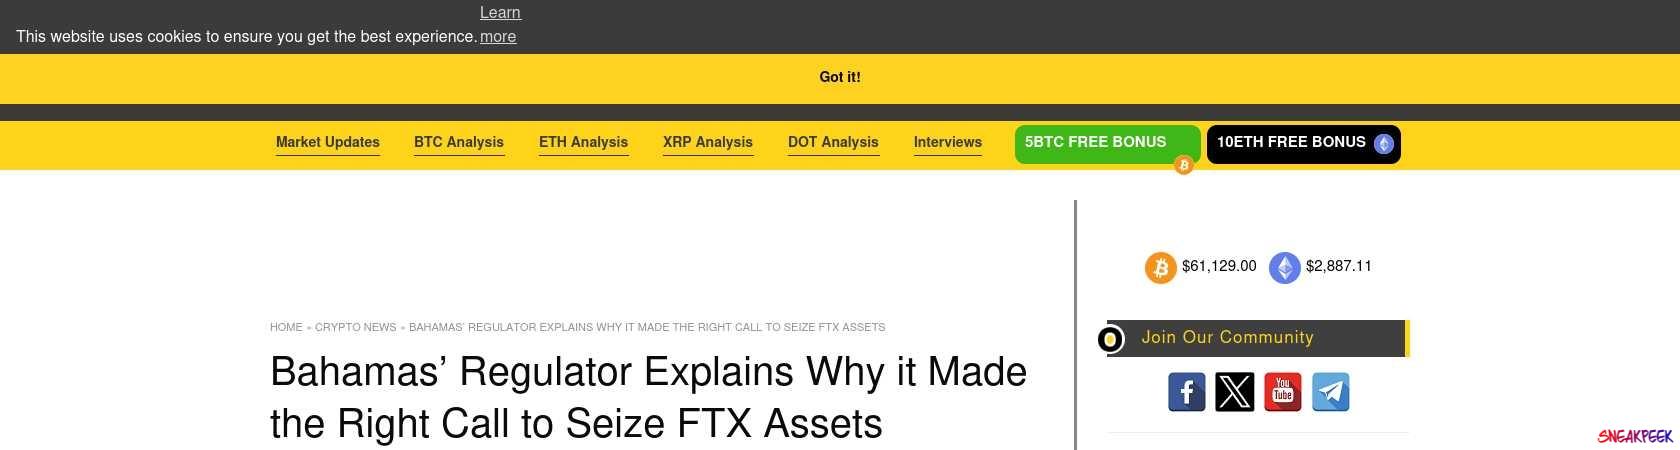 Read the full Article:  ⭲ Bahamas’ Regulator Explains Why it Made the Right Call to Seize FTX Assets